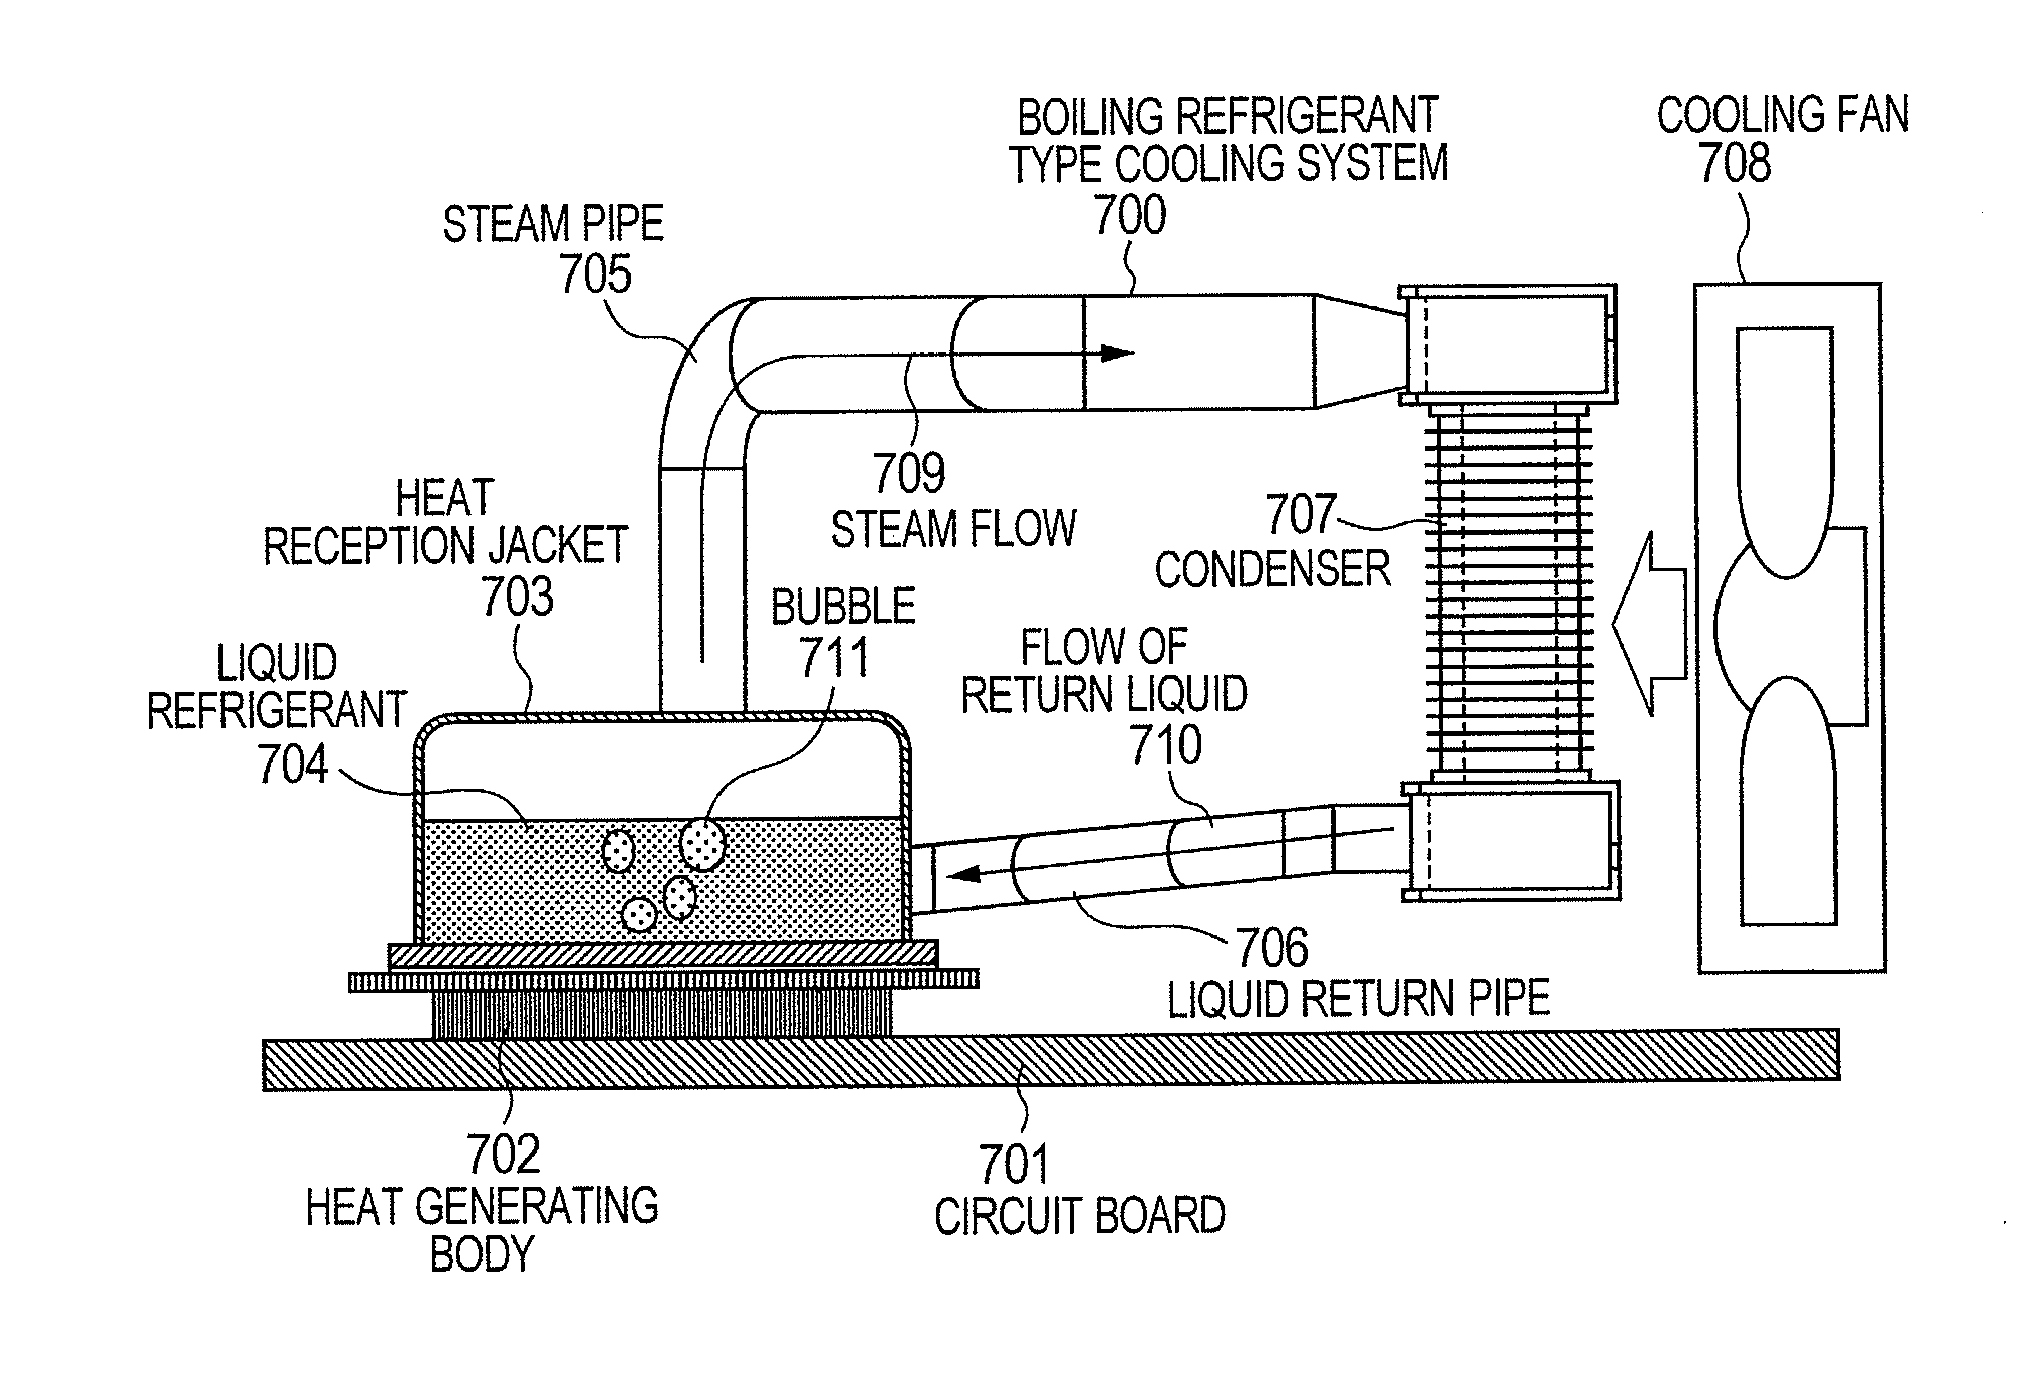 Boiling refrigerant type cooling system